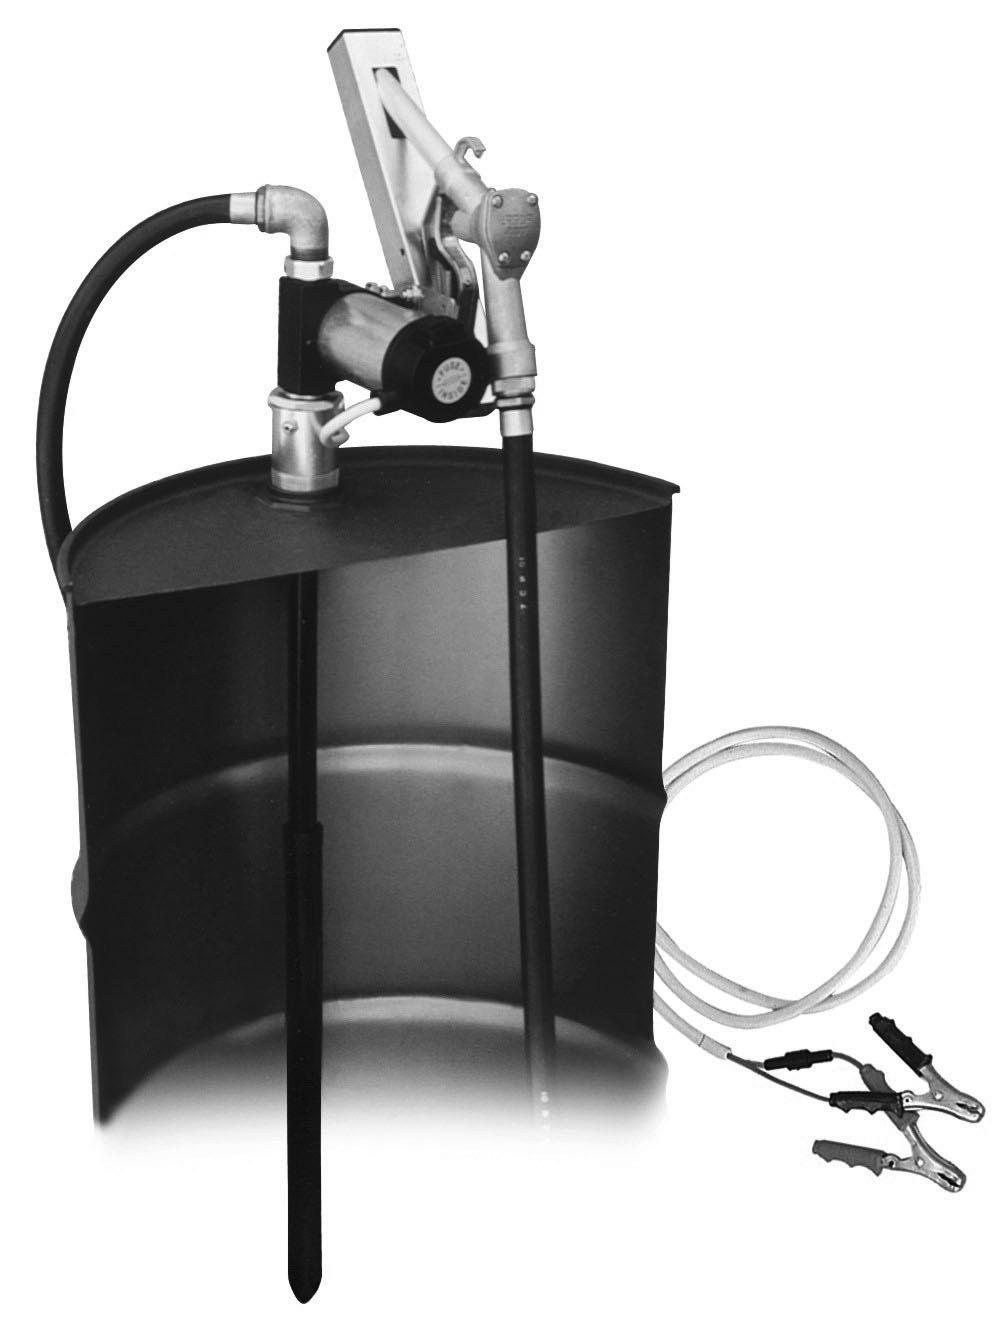 Oil & Light Fluid Pumps Diesel Pumps Features Simple and efficient transferring or dispensing of fluids from a drum Safe, troublefree fueling where AC power